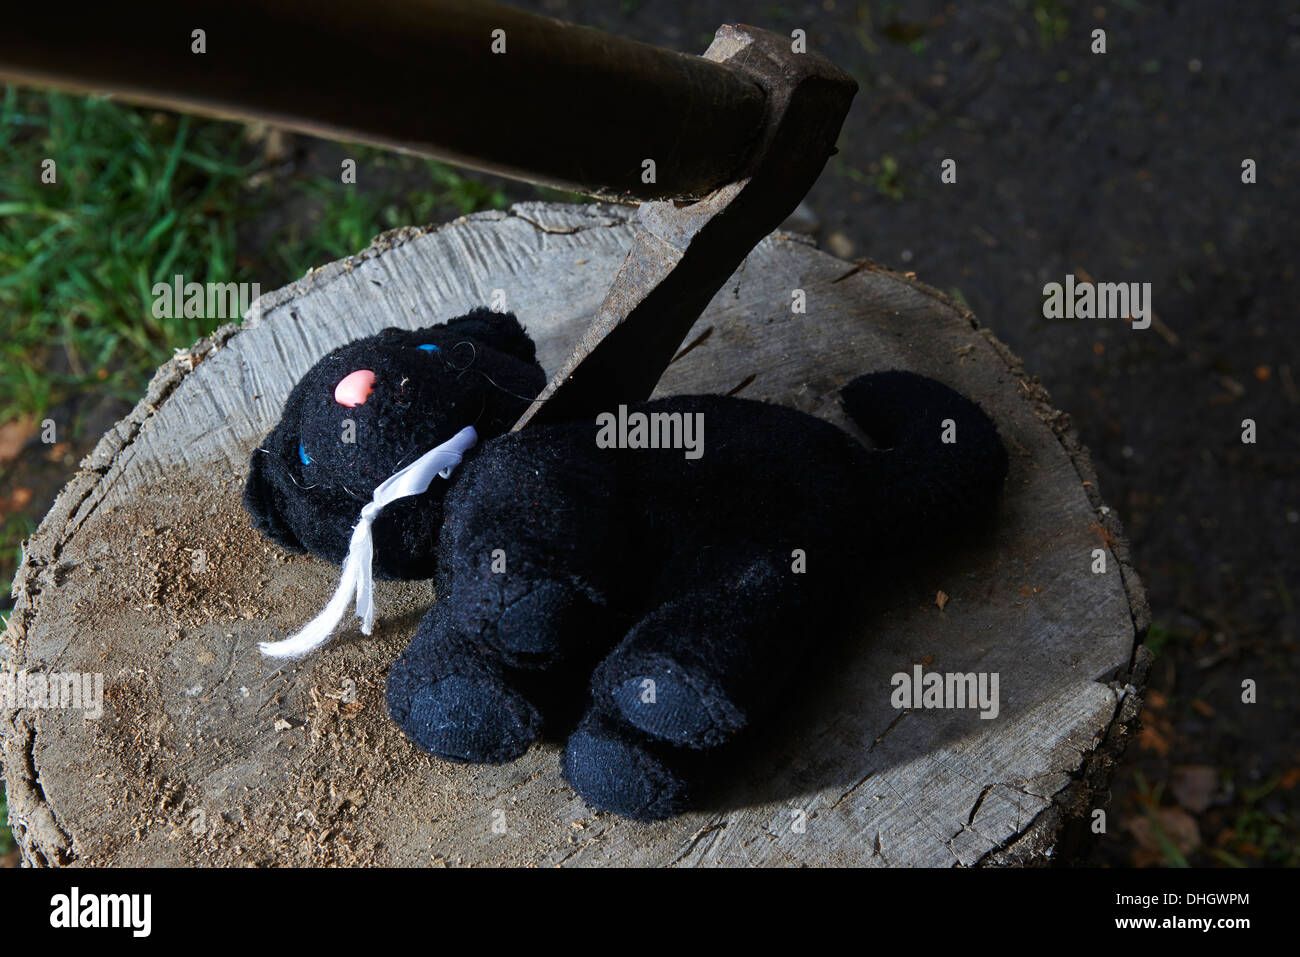 Execution - murder of child cuddly toy black cat with an ax Stock Photo